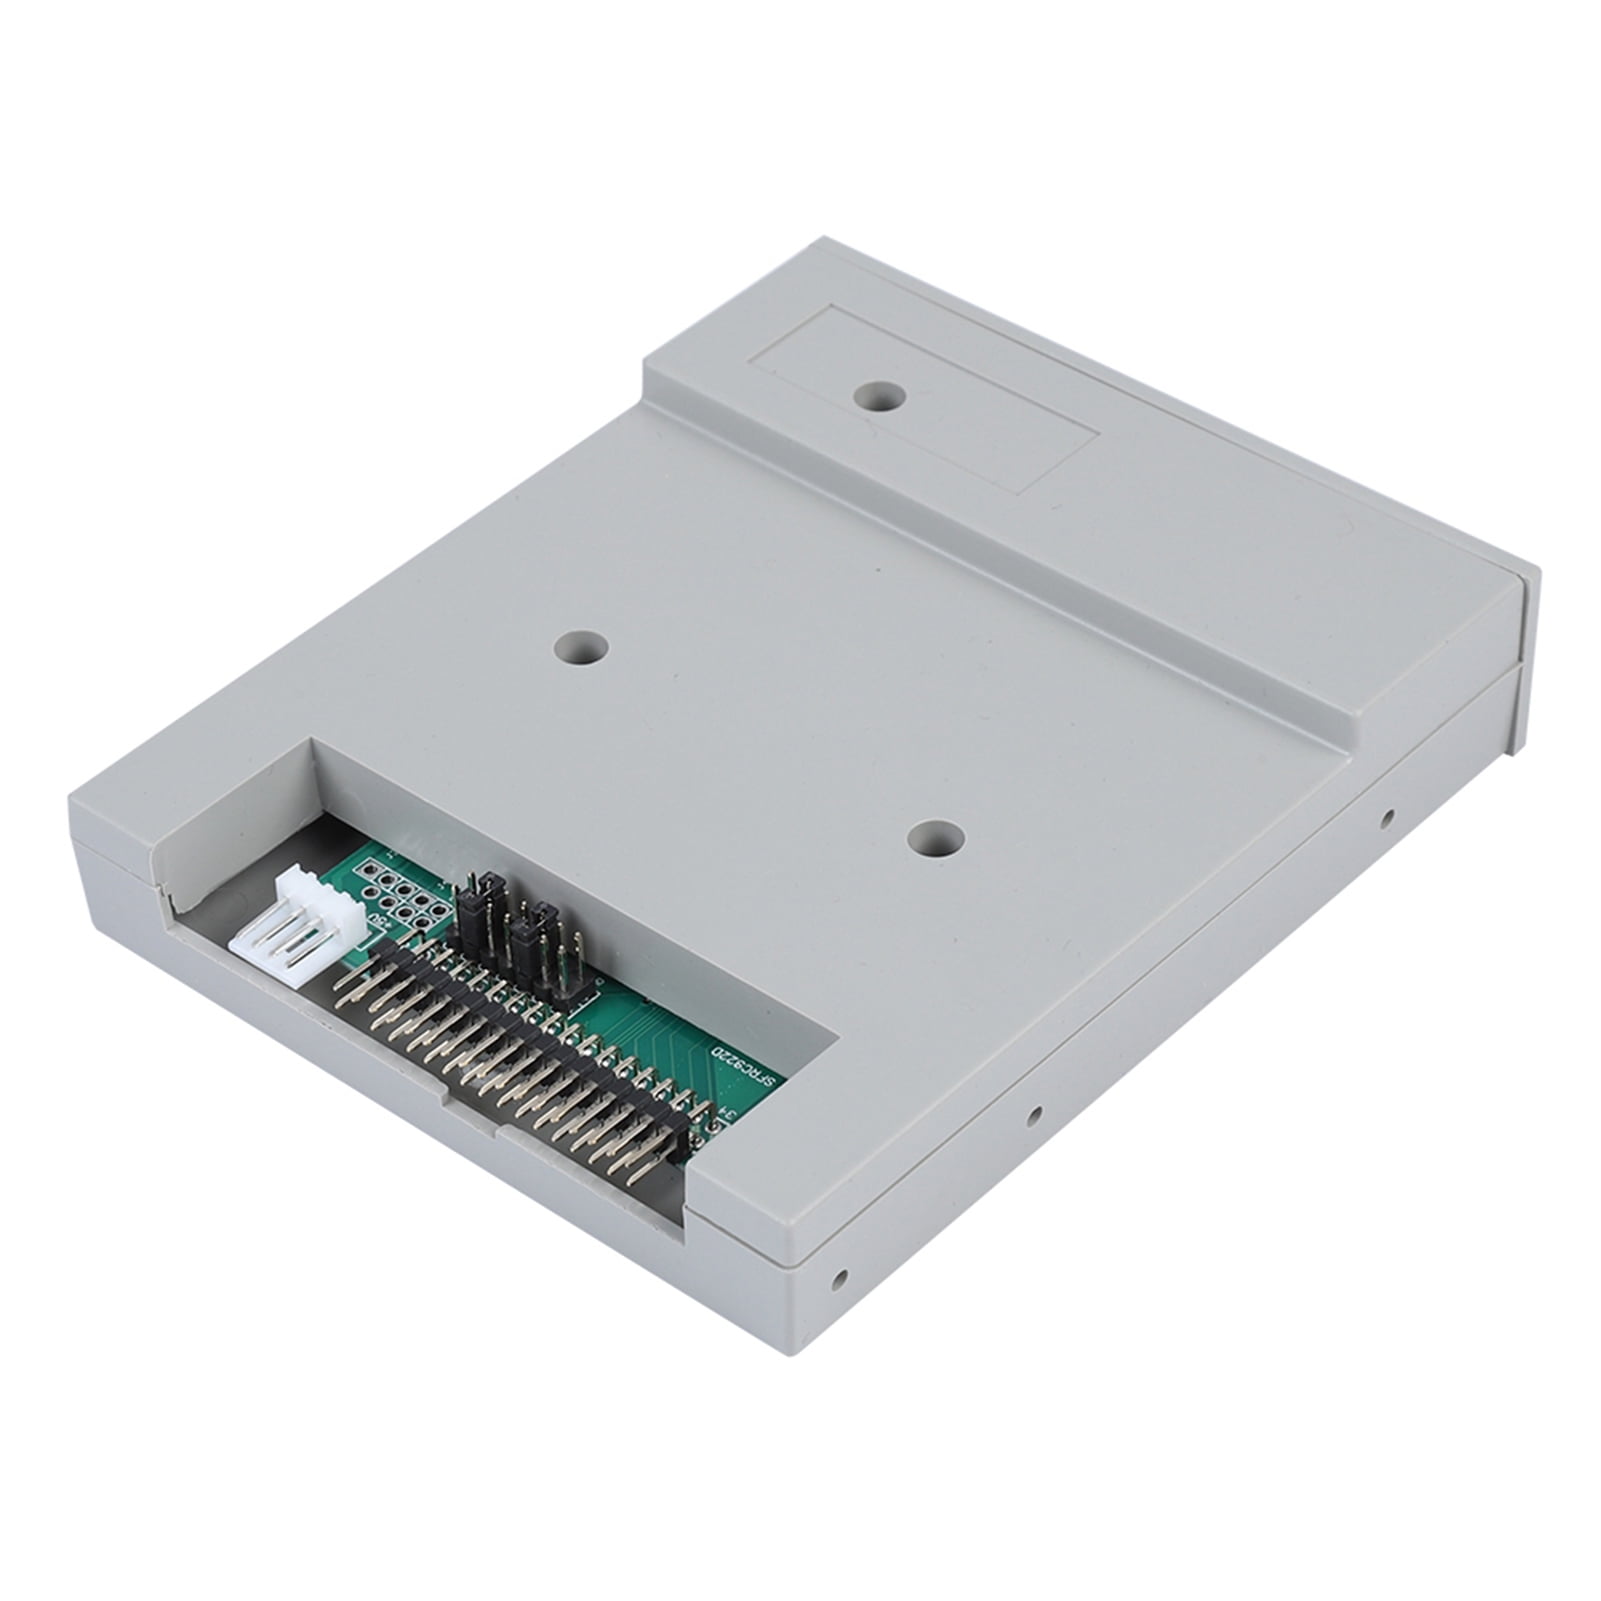 længes efter Diskurs venlige CHICIRIS Fosa Floppy & Tape Drives SFR1M44-FU USB Floppy Drive Emulator For  Embroidery Machine Plug And Play Floppy To USB Converter With 3.5In 1.44MB  34-Pin Floppy Disk Driver Interface - Walmart.com